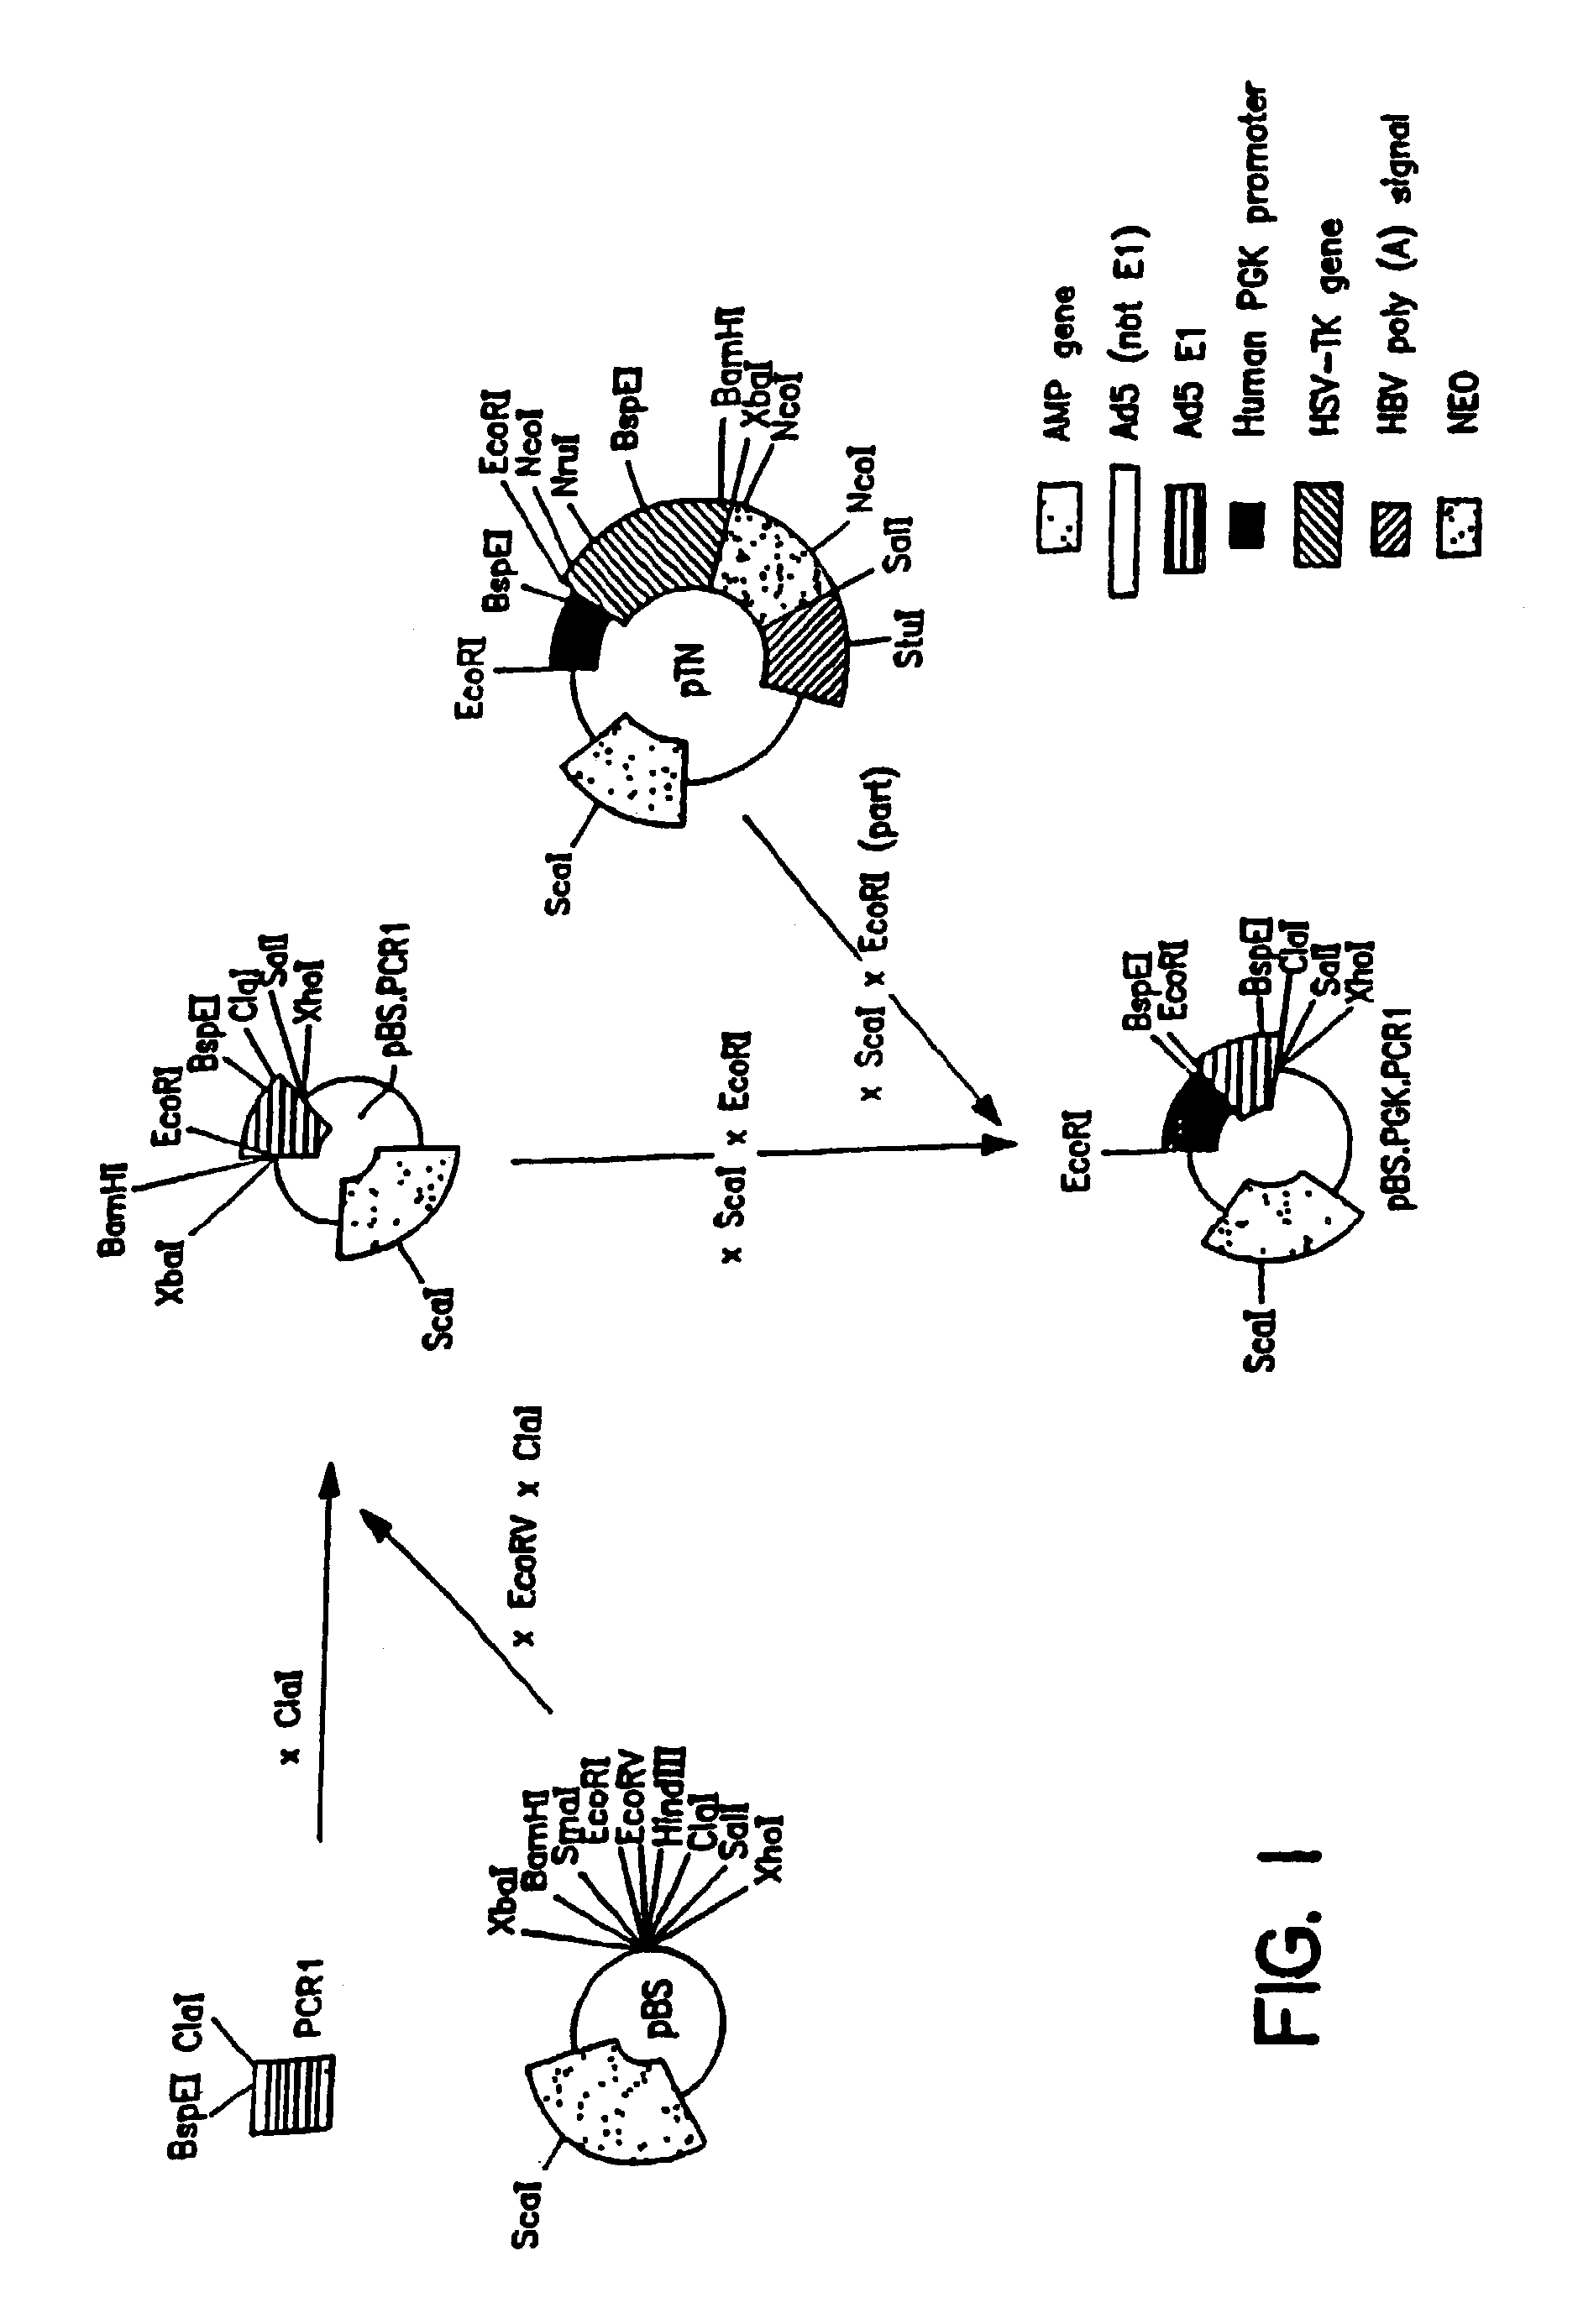 Packaging systems for human recombinant adenovirus to be used in gene therapy